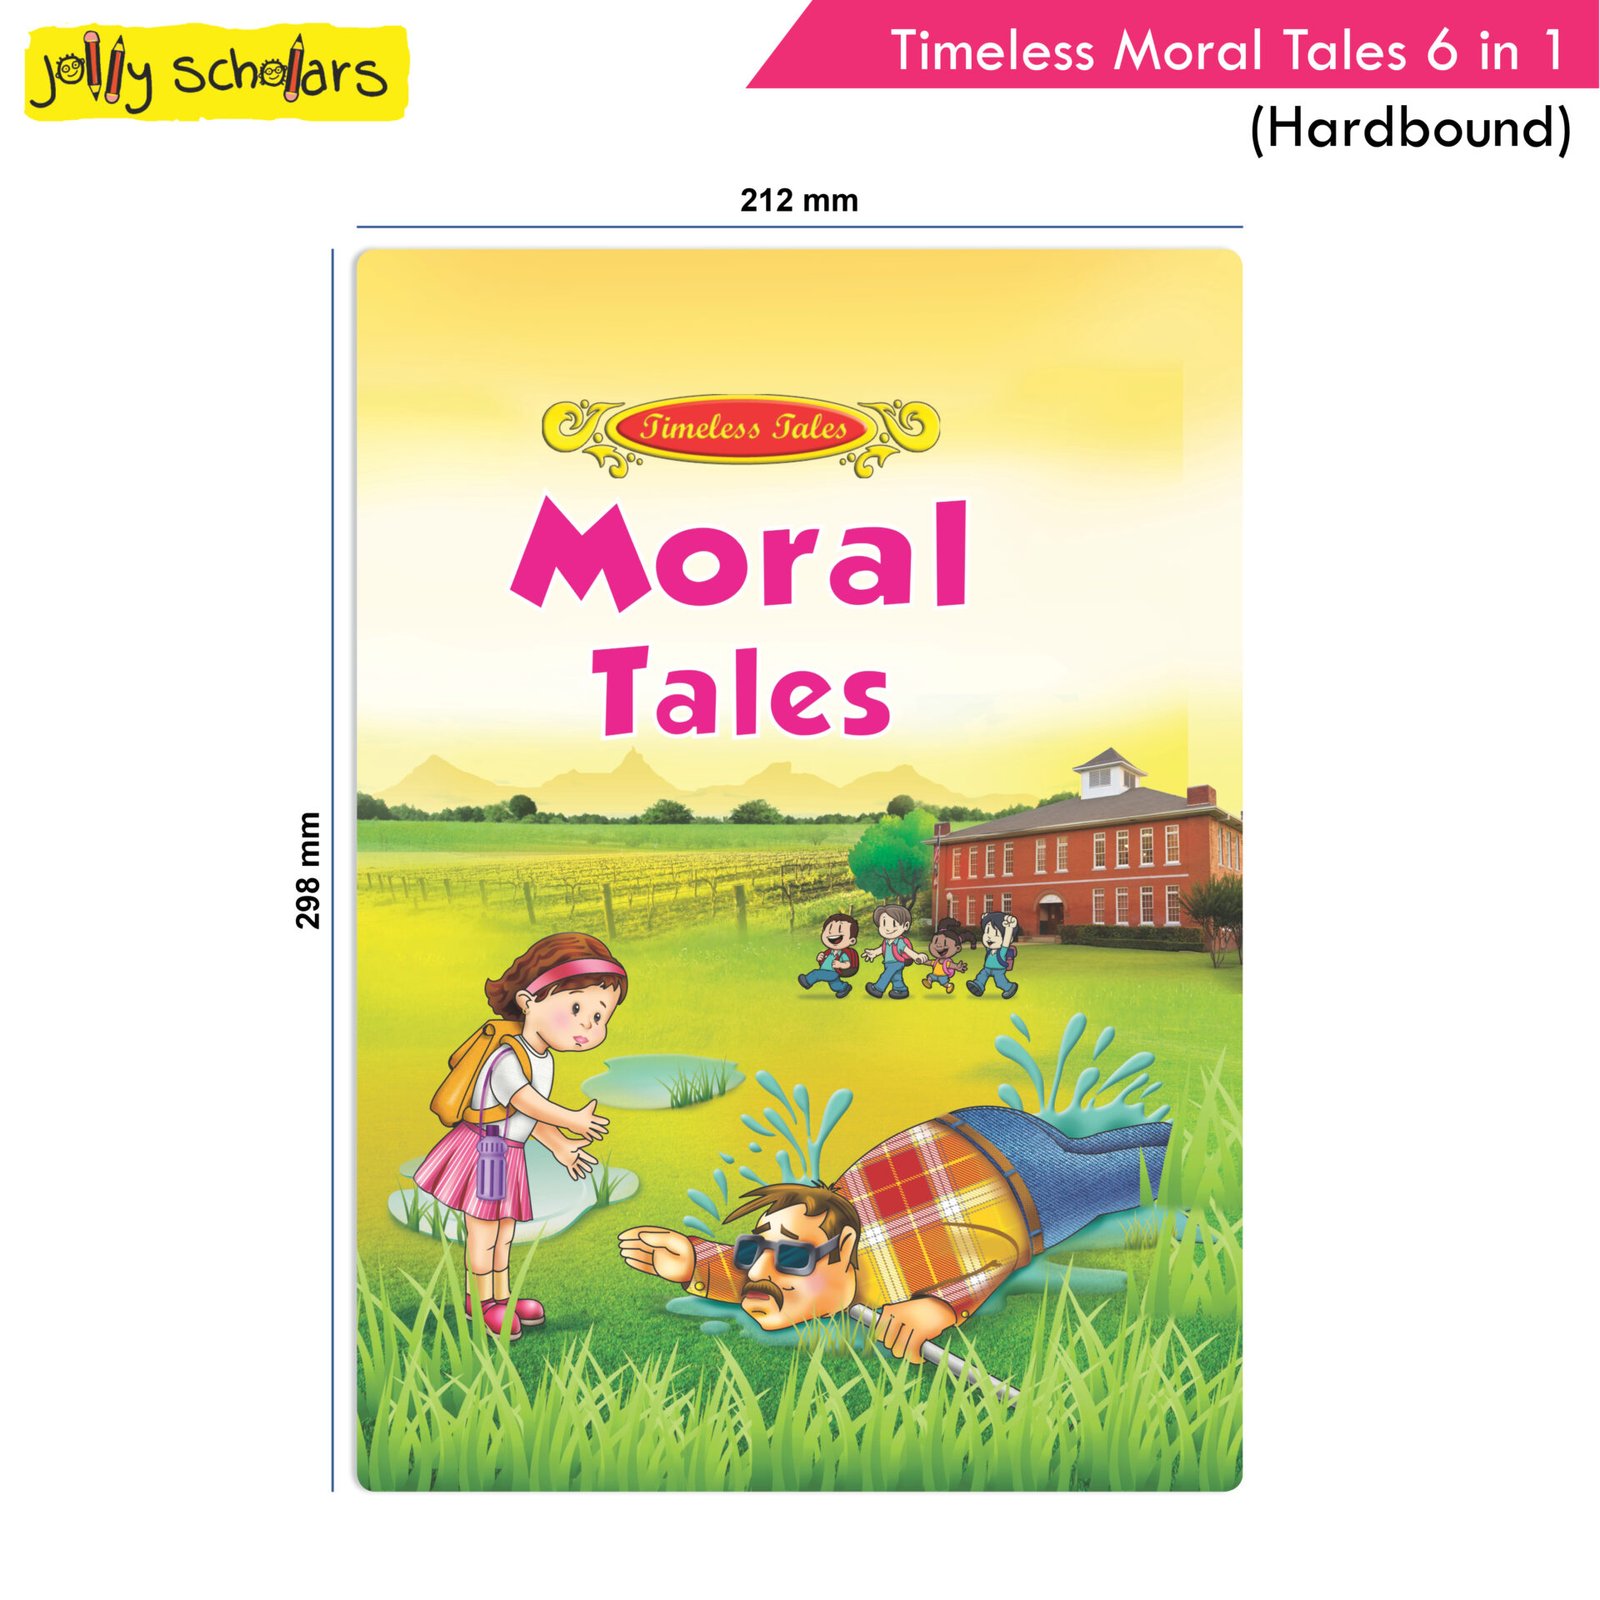 Jolly Scholars Timeless Moral Tales 6 in 1 Hard Bound 2